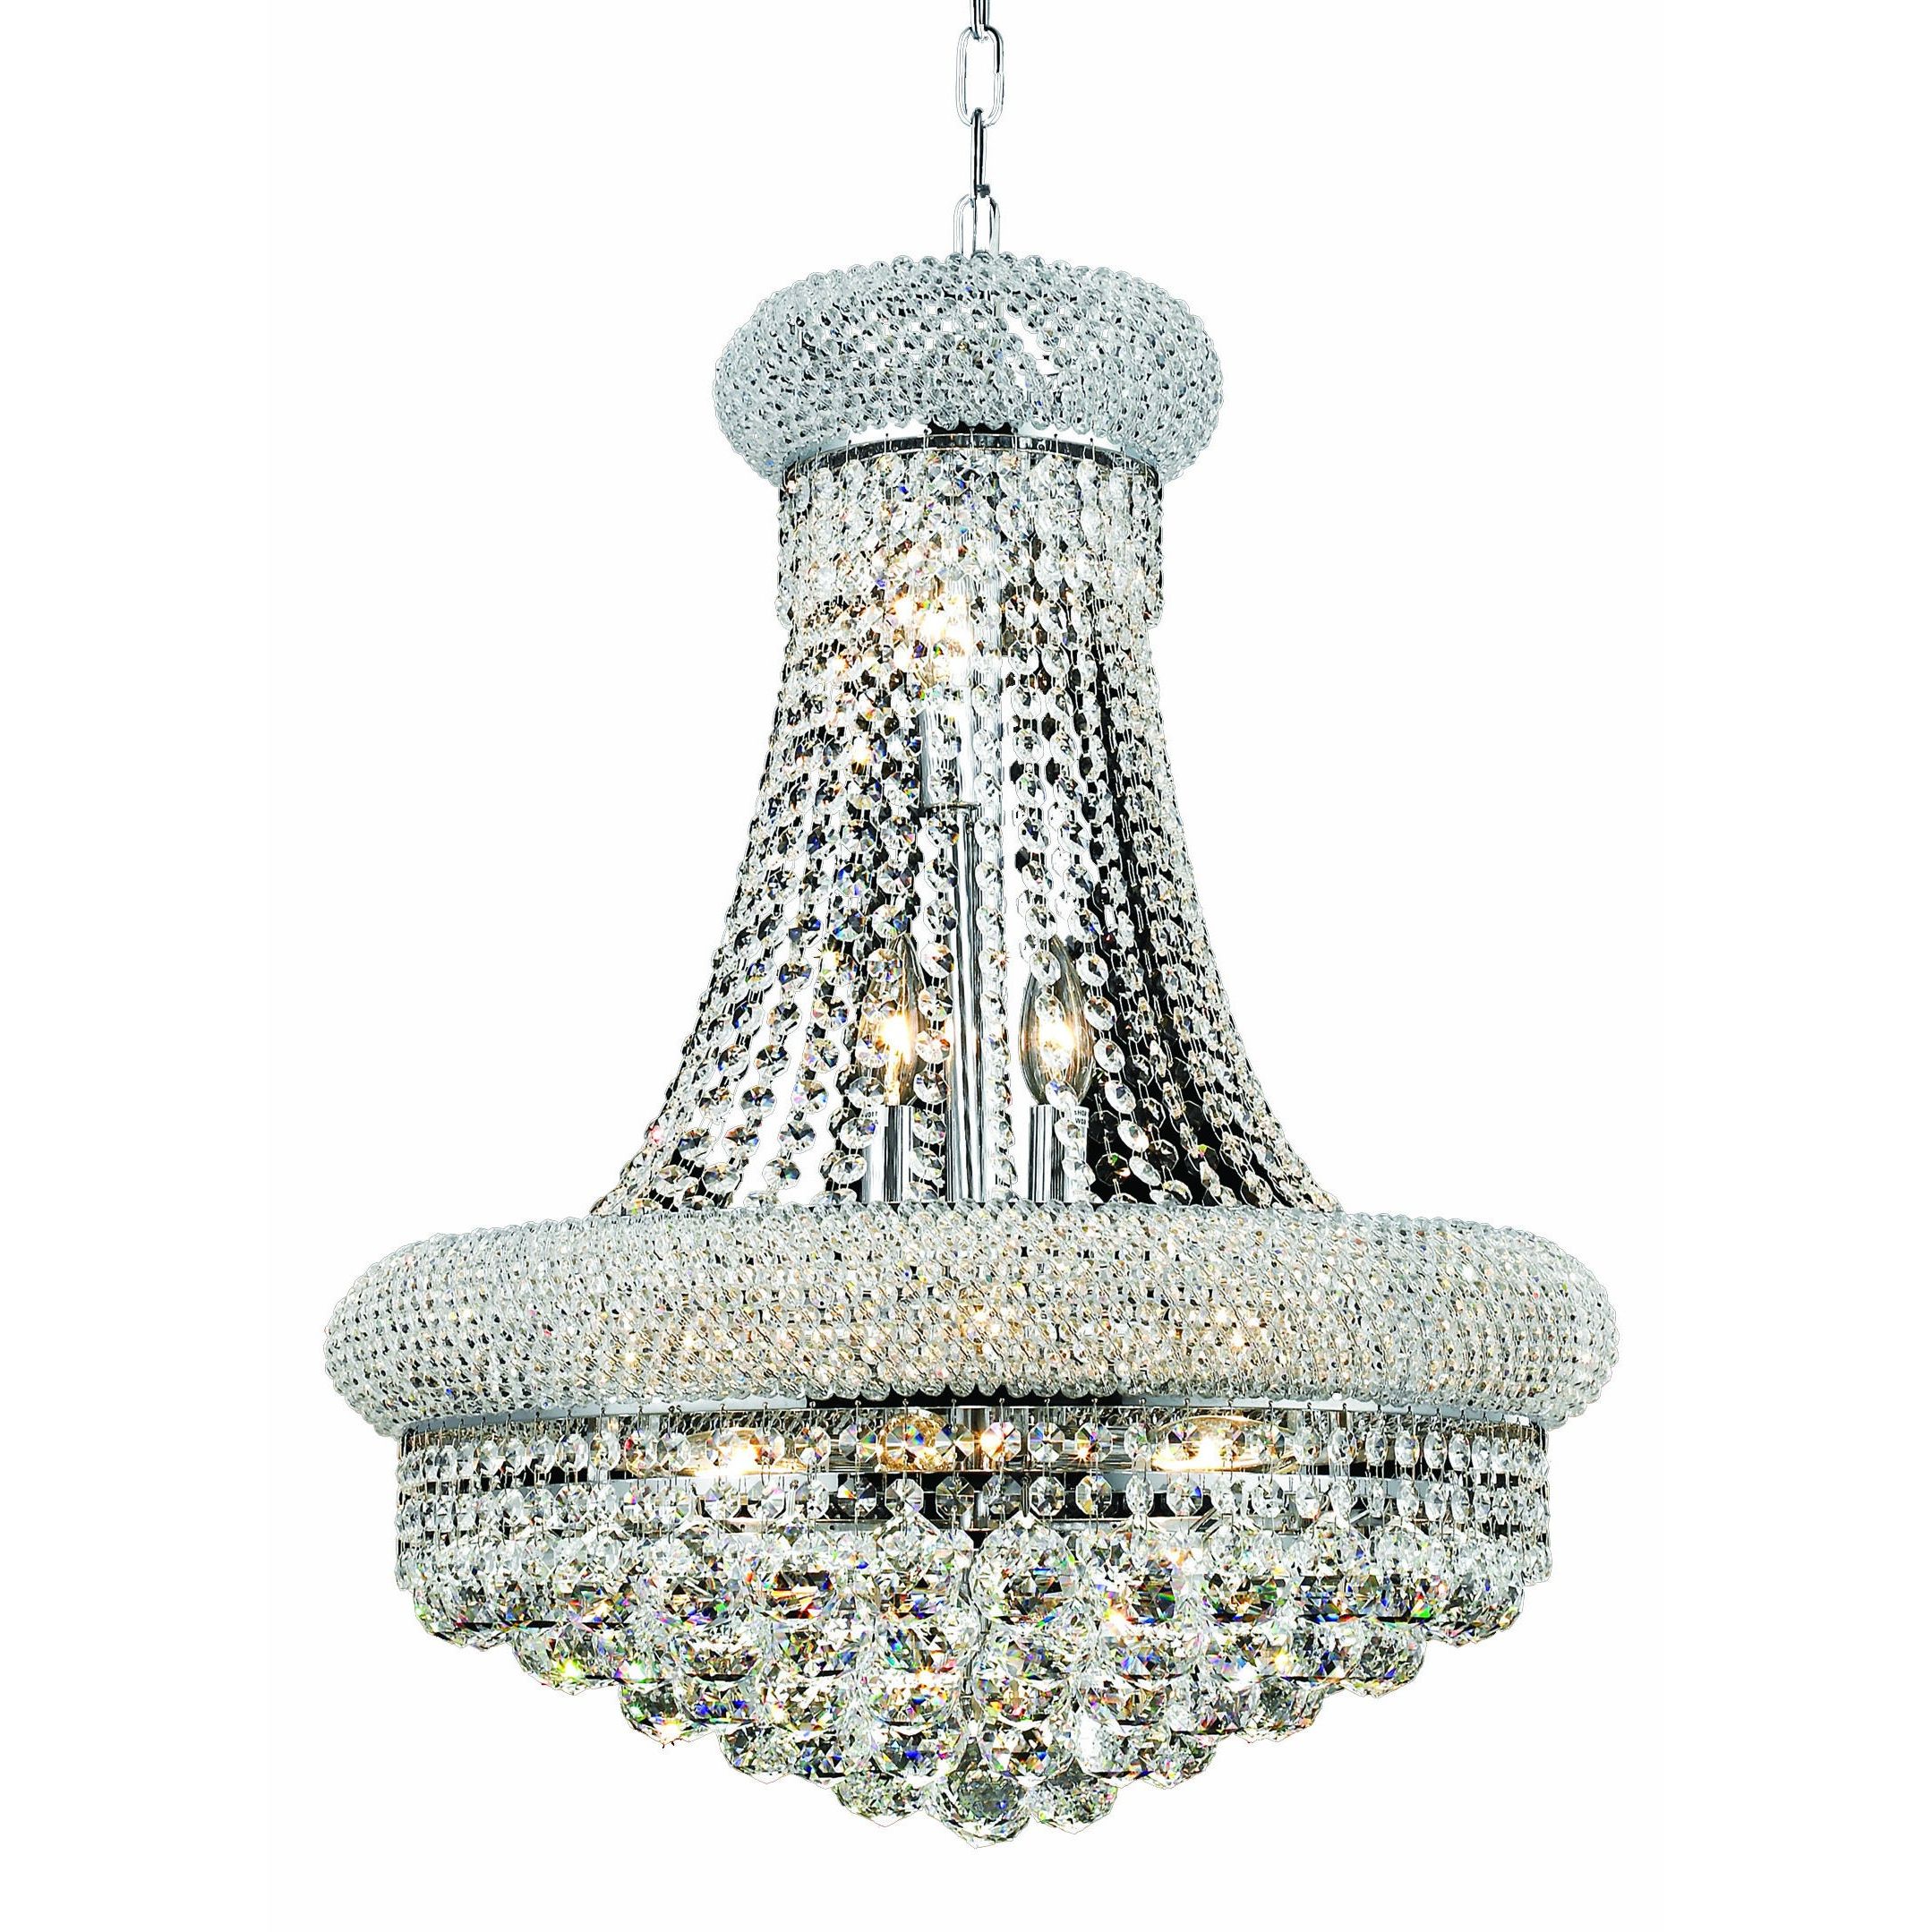 Shop Our Best Lighting Intended For Hamza 6 Light Candle Style Chandeliers (View 25 of 25)